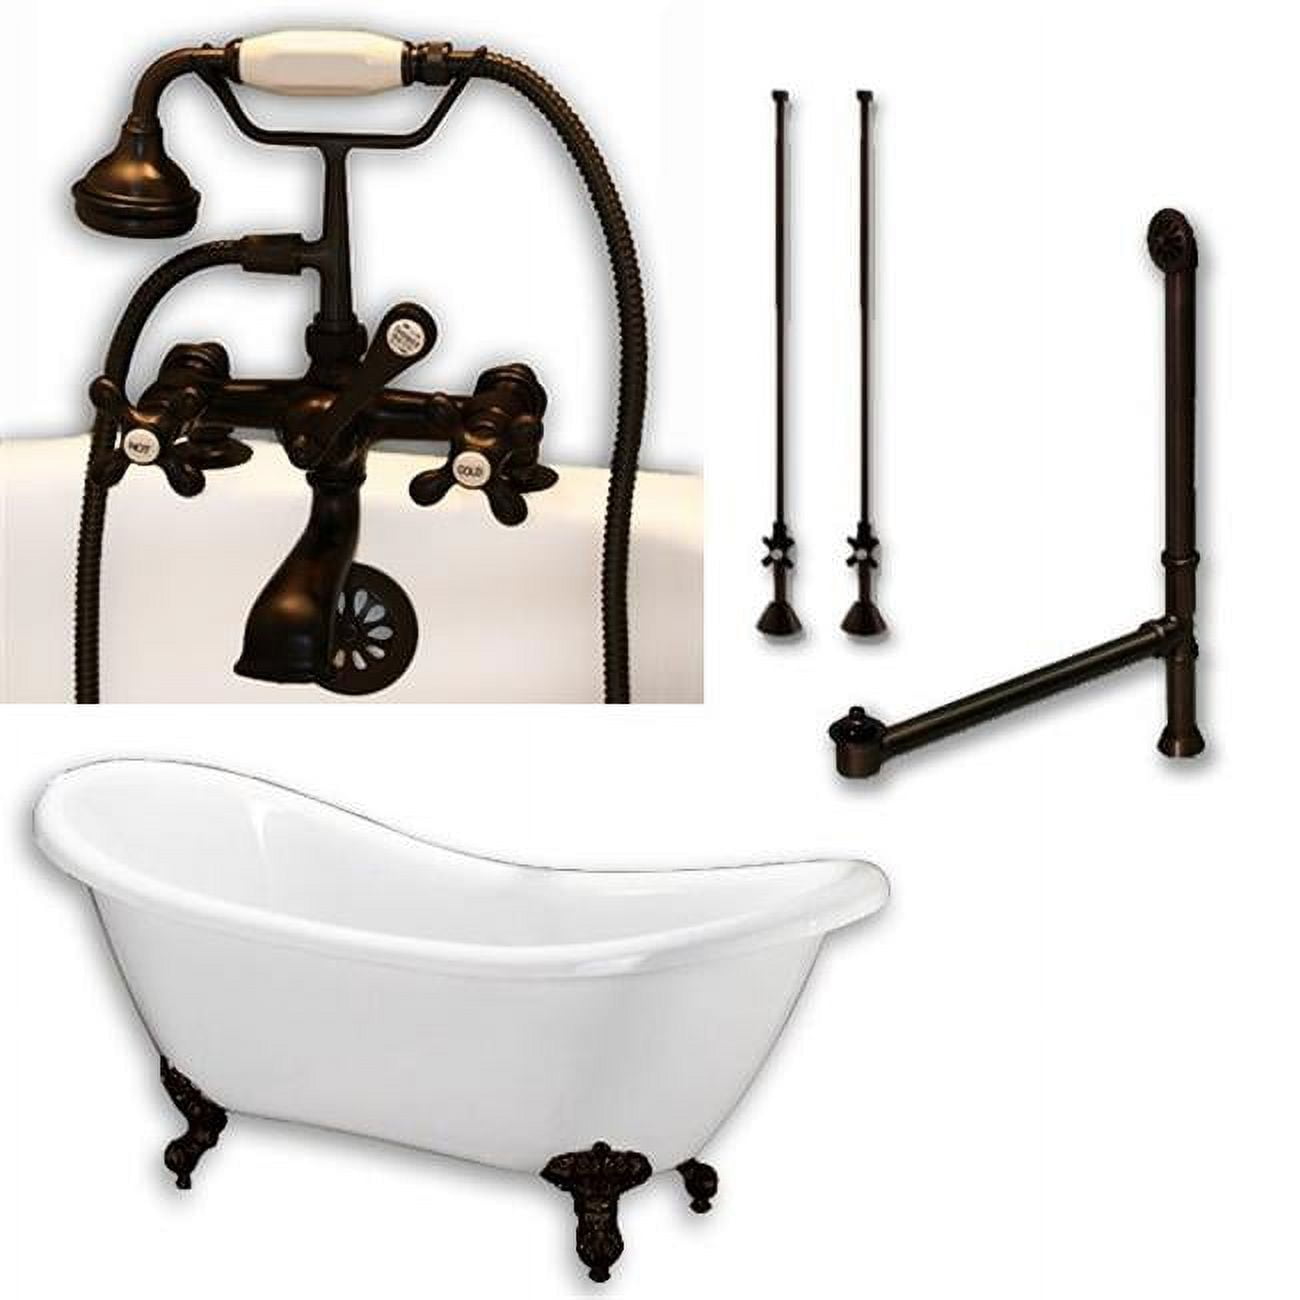 Ades-ped-463d-6-pkg-orb-7dh Acrylic Double Ended Slipper Tub With 6 In. Pedestal Holes Deck Risers, Classic Telephone Style Faucet & Orb Plumbing